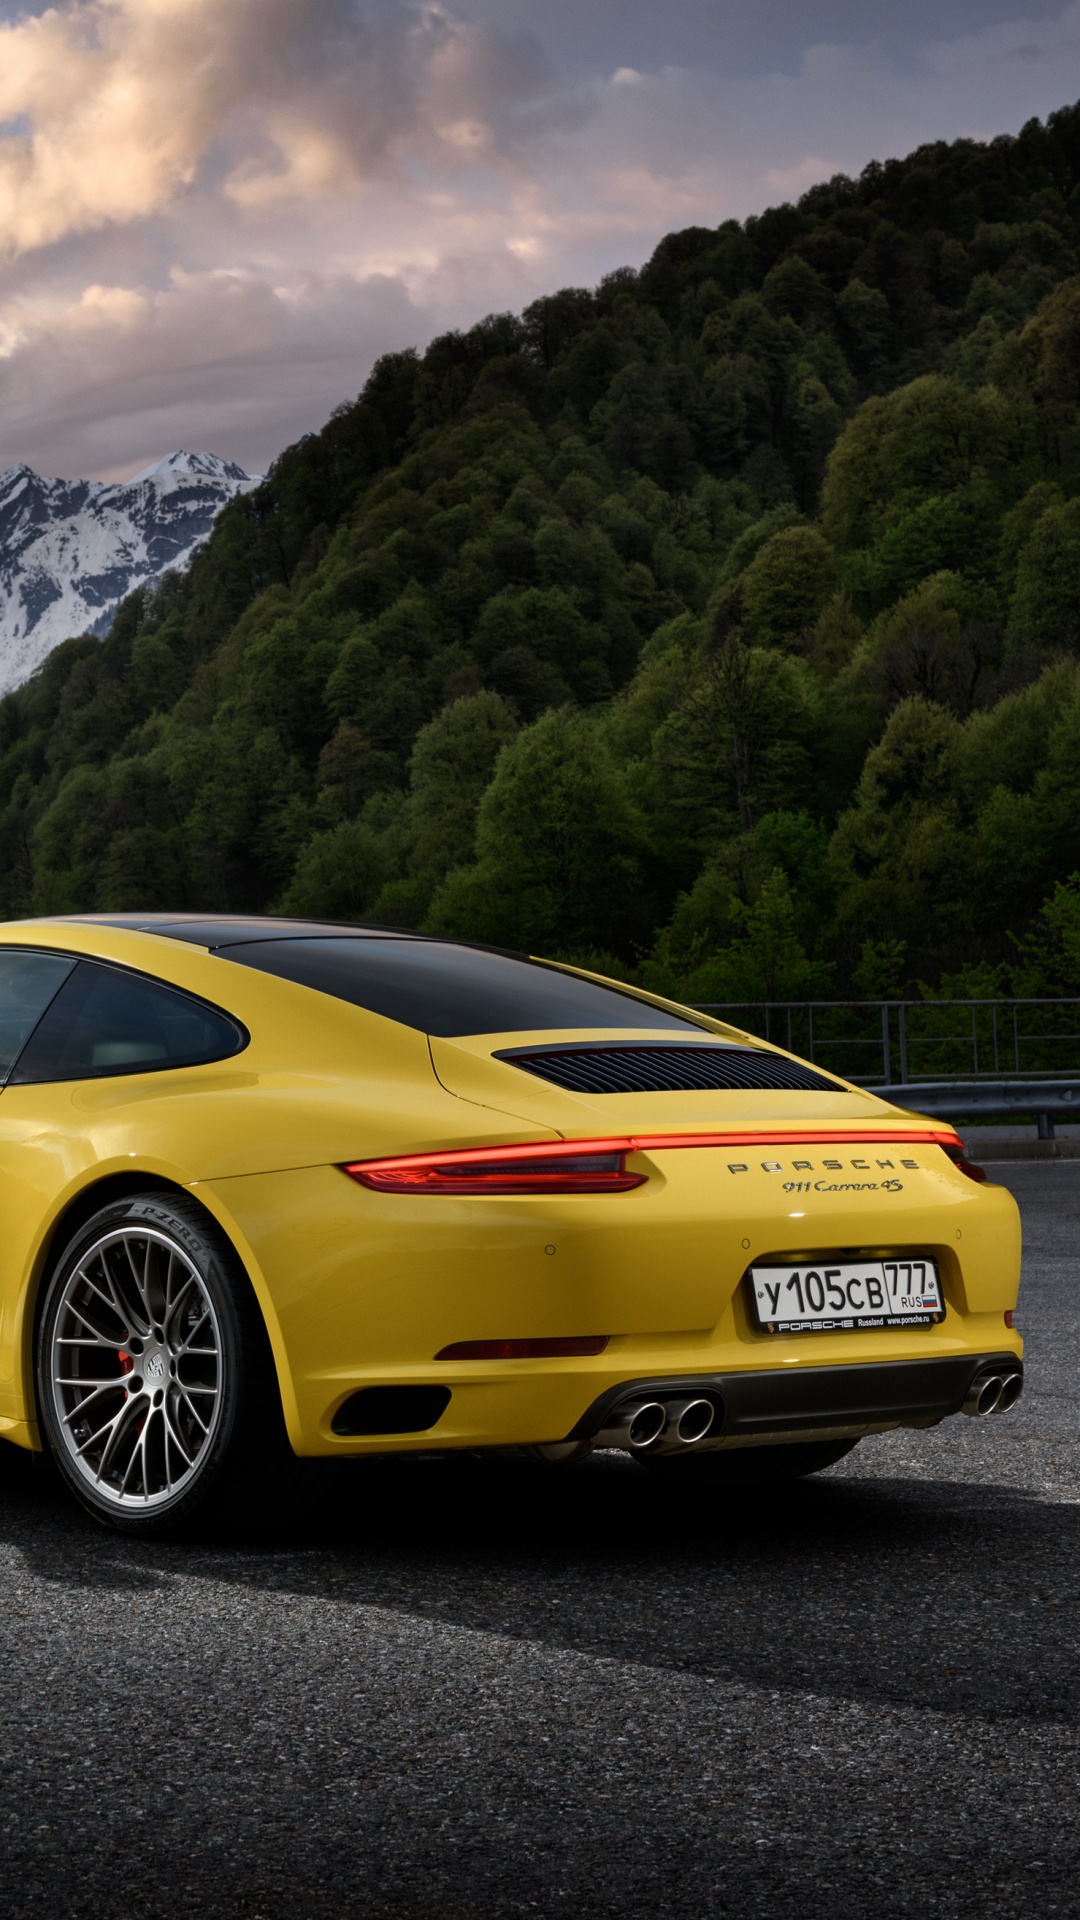 Yellow Porsche 911 on Road Near Mountain During Daytime. Wallpaper in 1080x1920 Resolution